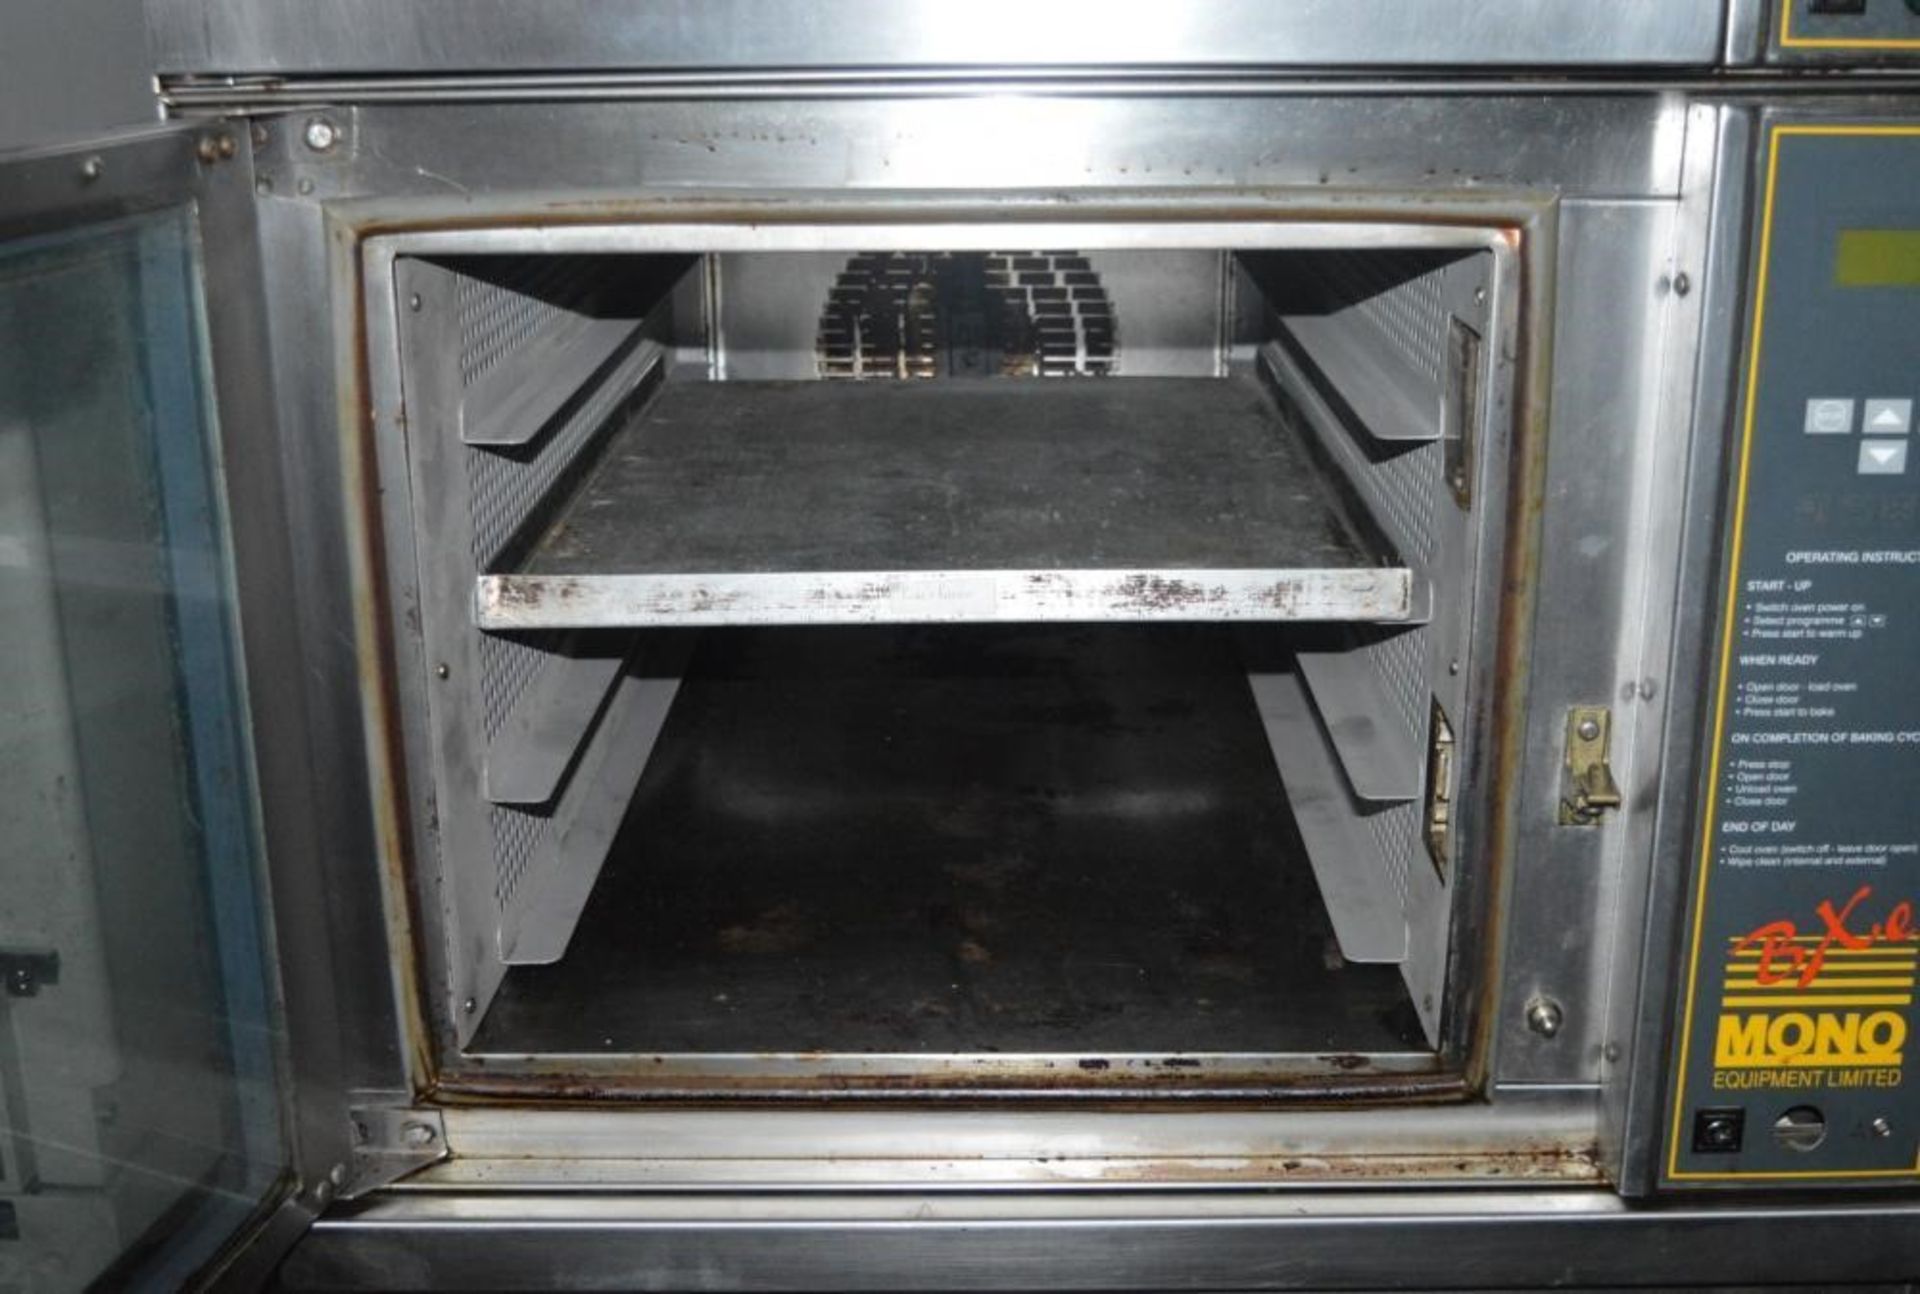 1 x Mono FG159 Double Bake Off Steam Convection Oven - Includes Ten Cooking Trays, Mobile Tray Holde - Bild 12 aus 14